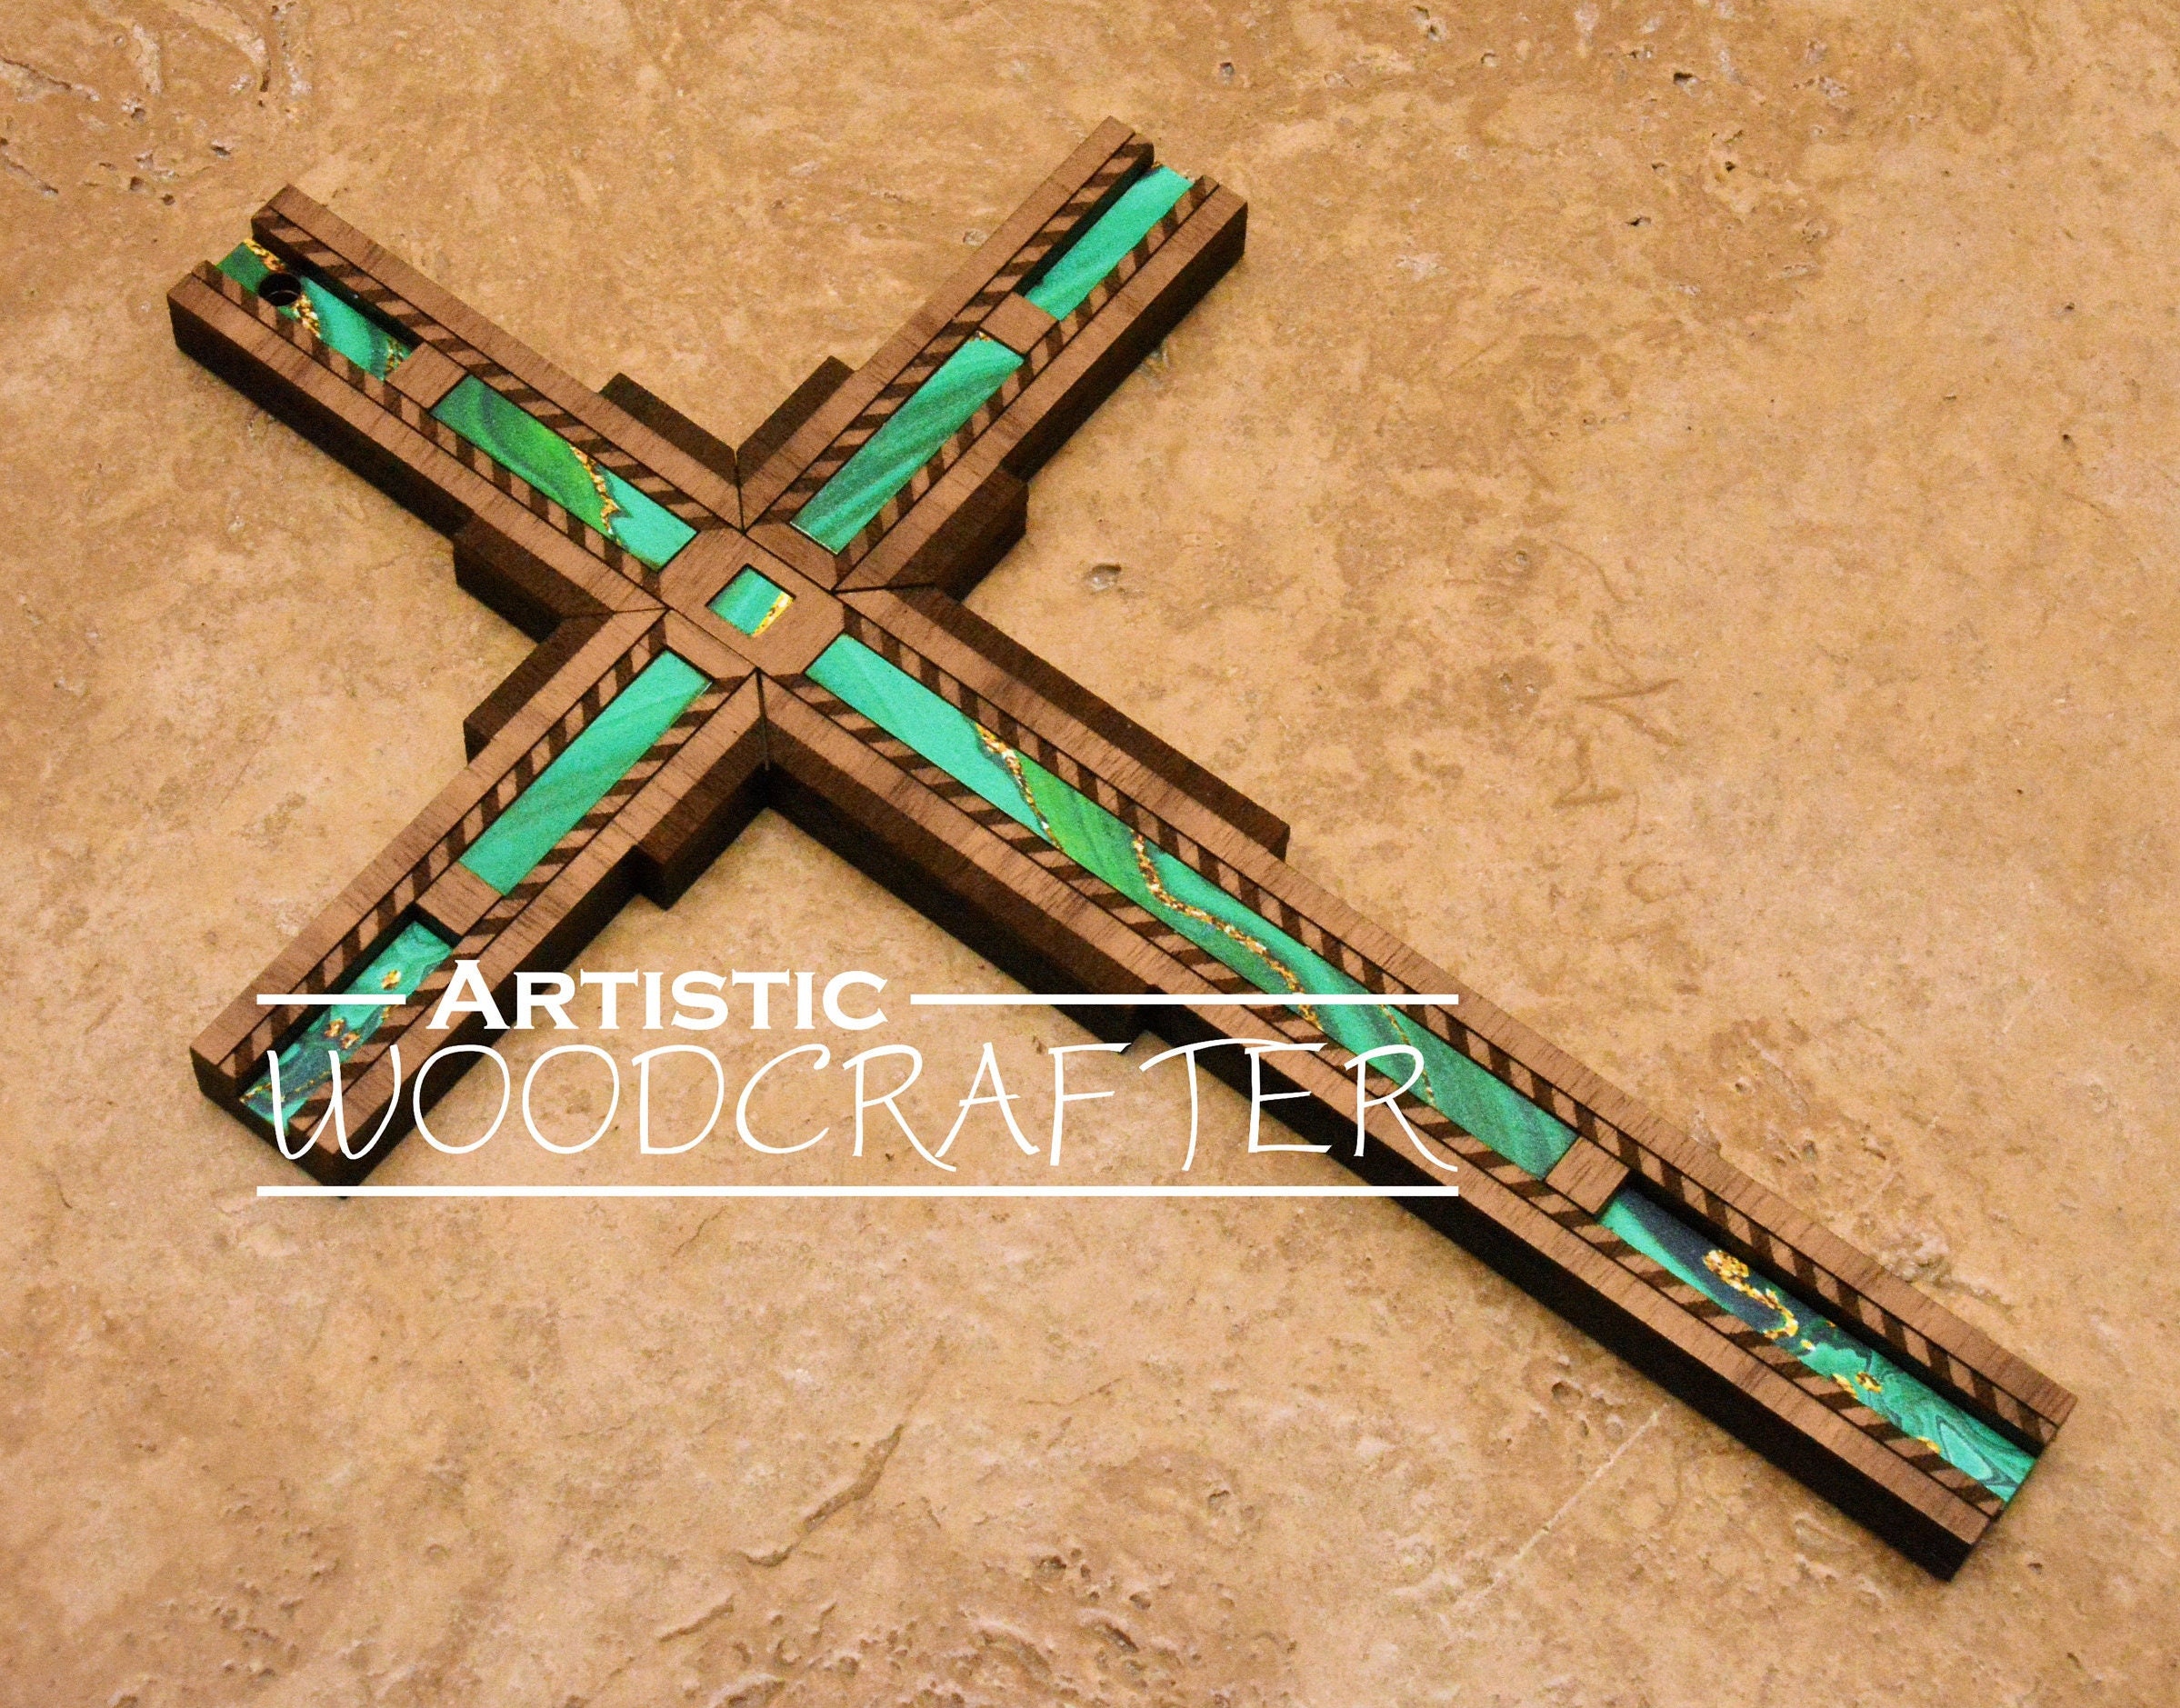 Wall Crosses for Home Cross for Wall Decor Wooden Cross Wall Decor